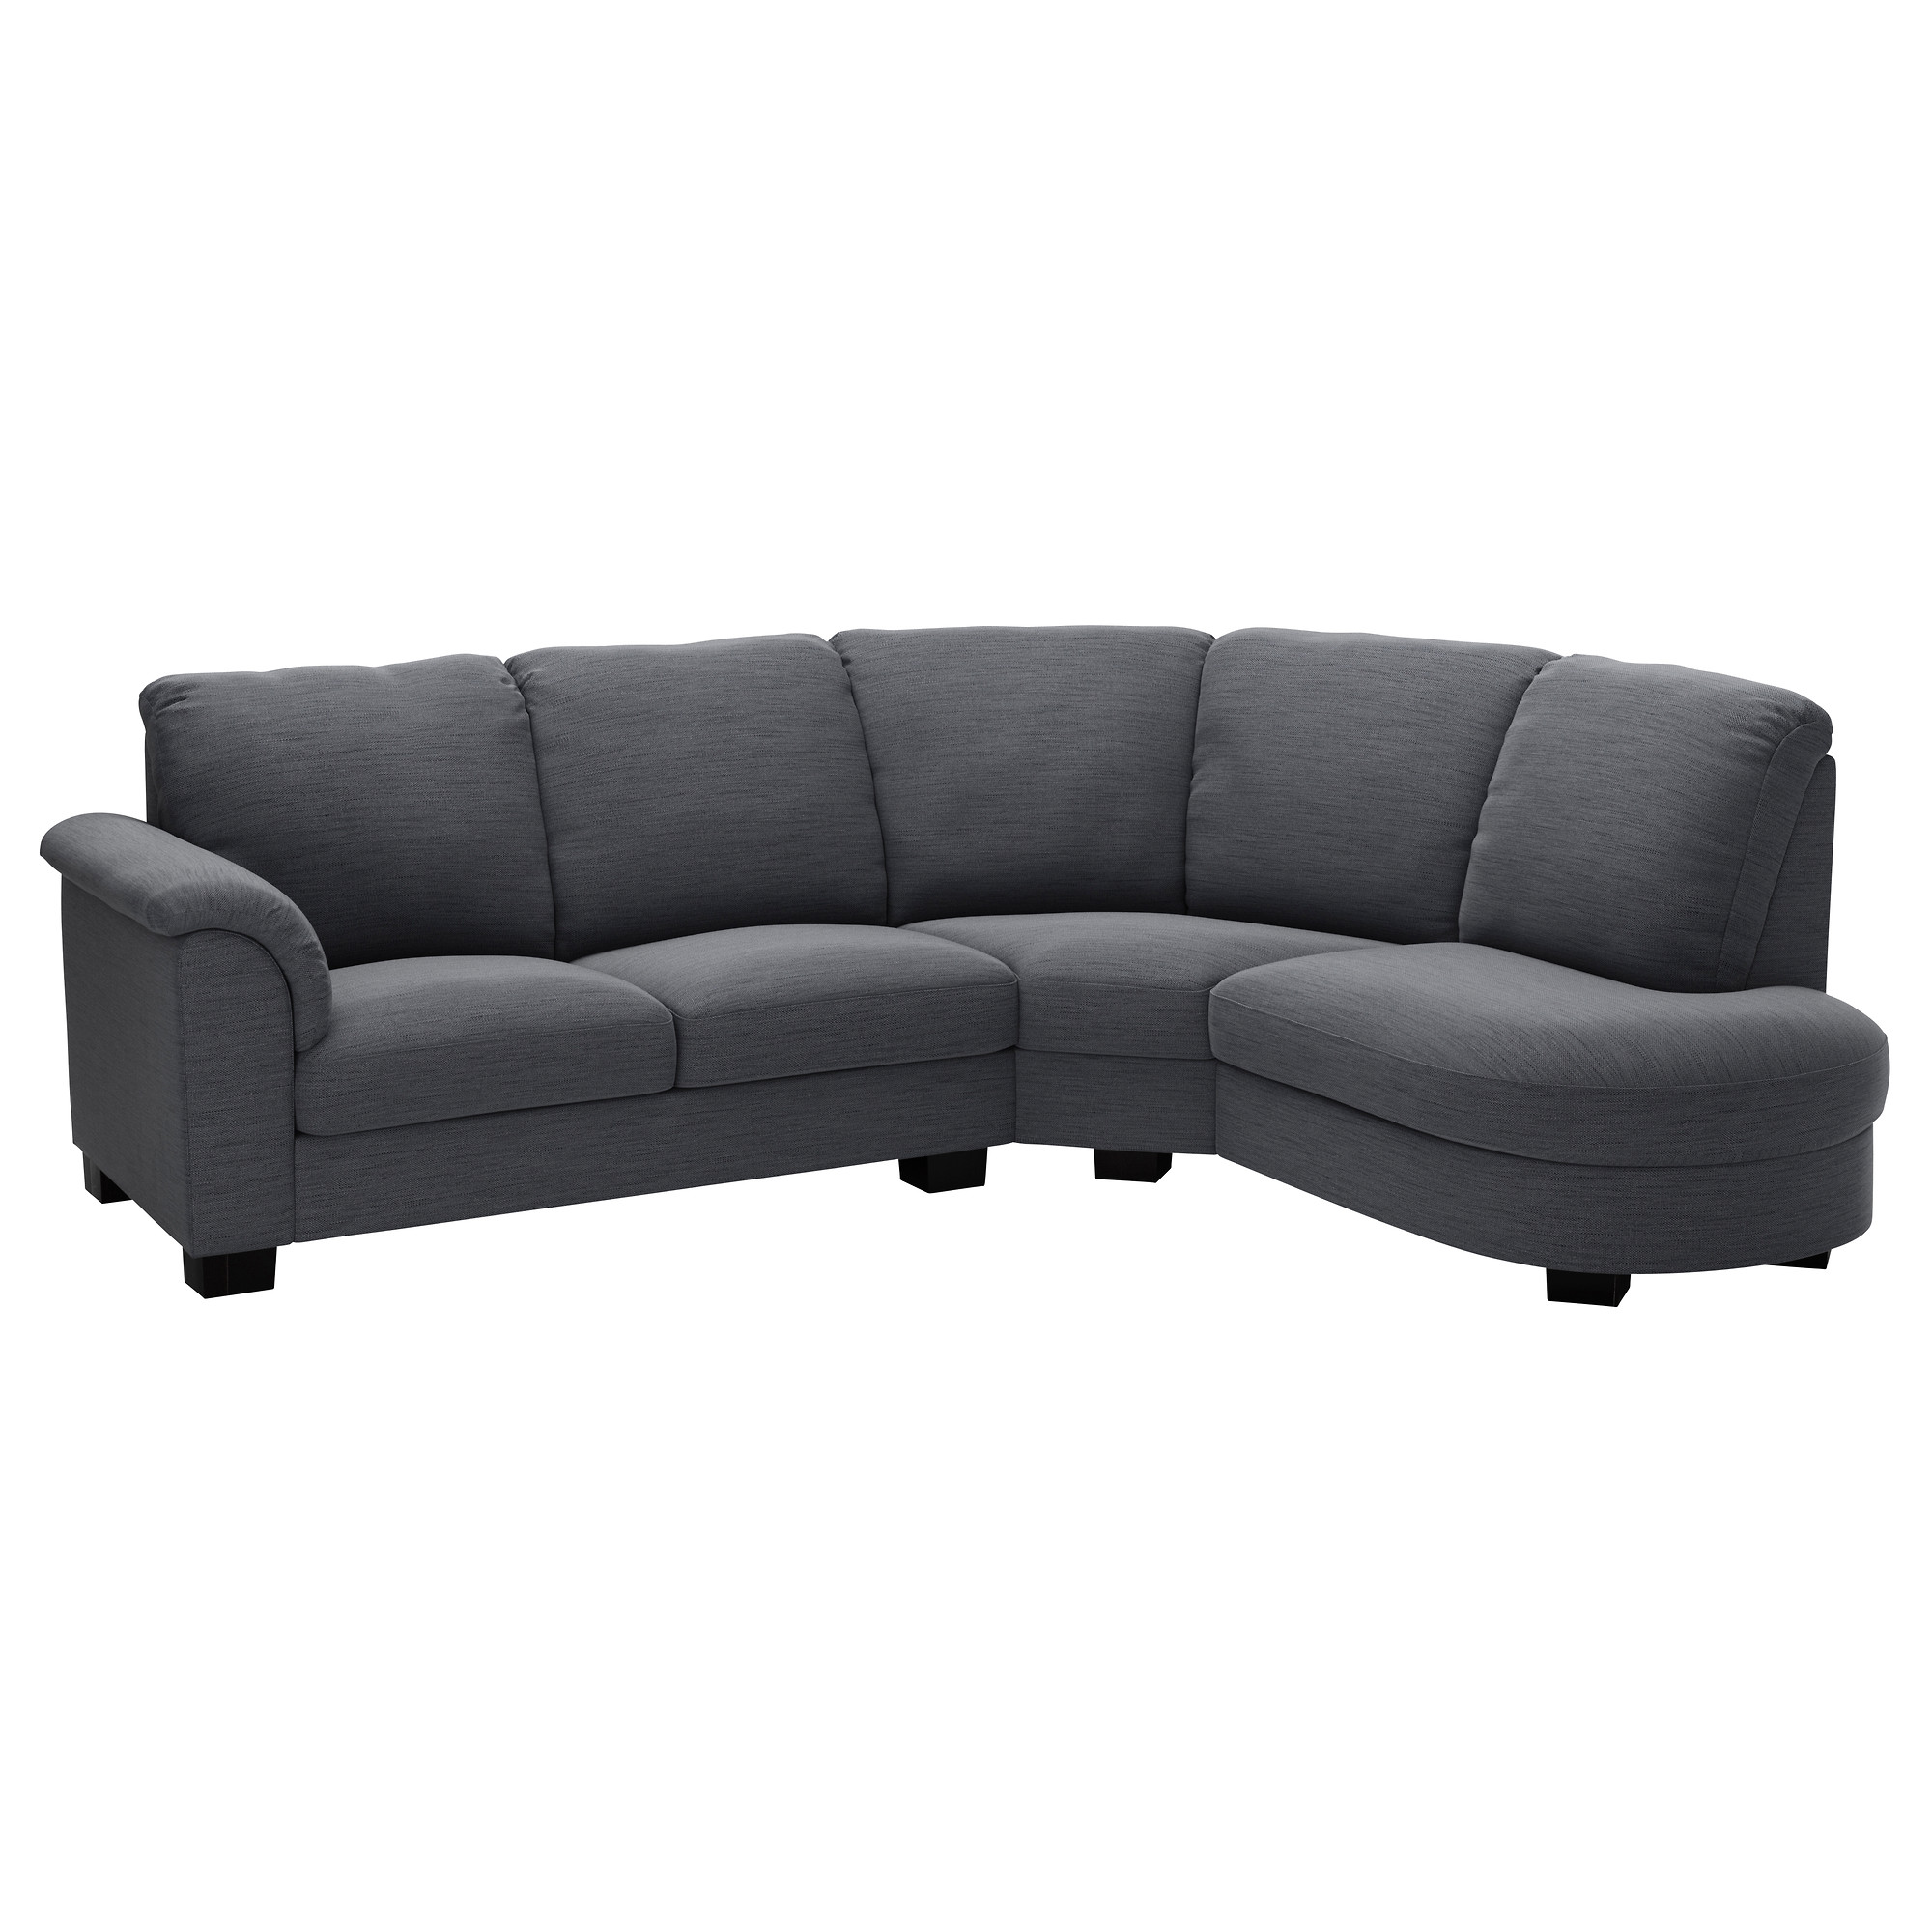 ikea tidafors corner sofa with arm left the high back gives good support EVKWCHZ